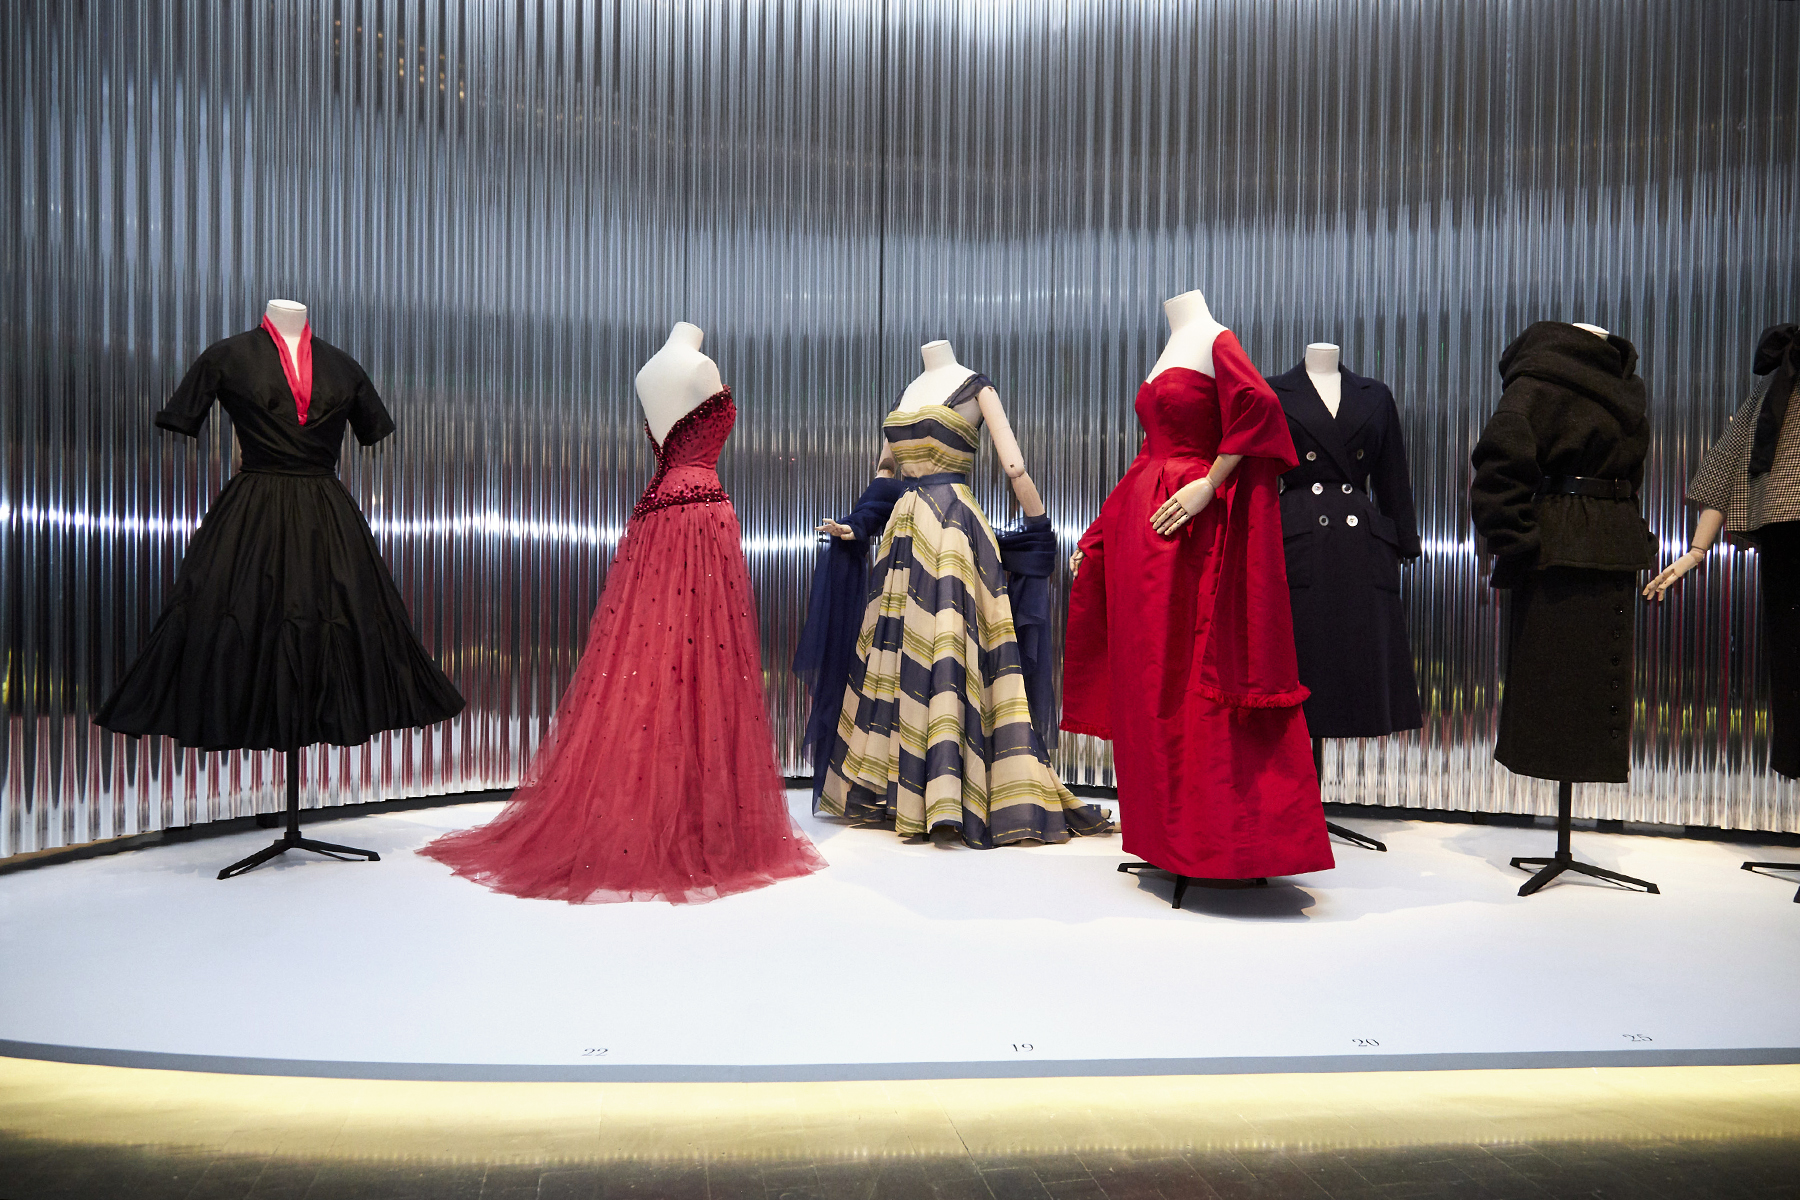 dior at the art museum